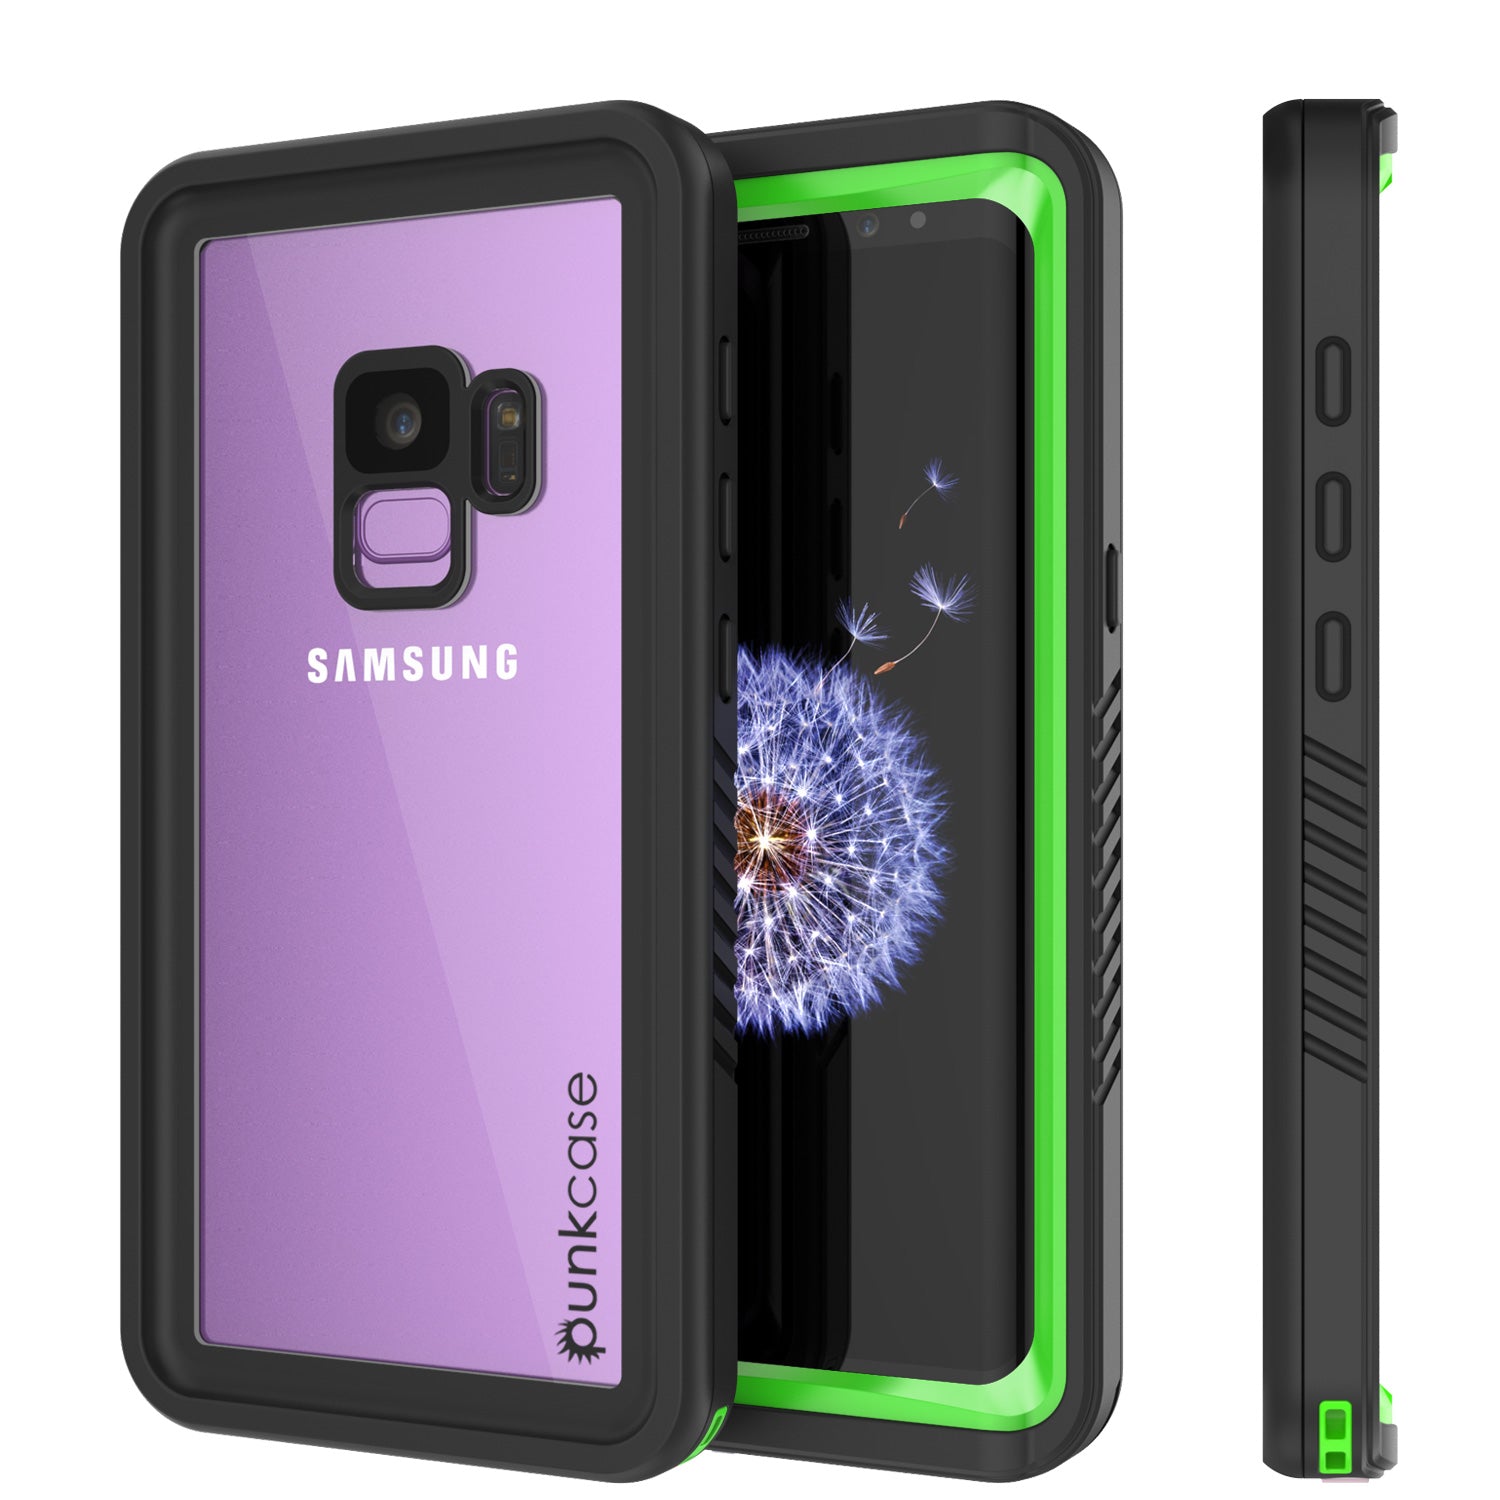 Galaxy S9 PLUS Waterproof Case, Punkcase [Extreme Series] [Slim Fit] [IP68 Certified] [Shockproof] [Snowproof] [Dirproof] Armor Cover W/ Built In Screen Protector for Samsung Galaxy S9+ [Light Green]